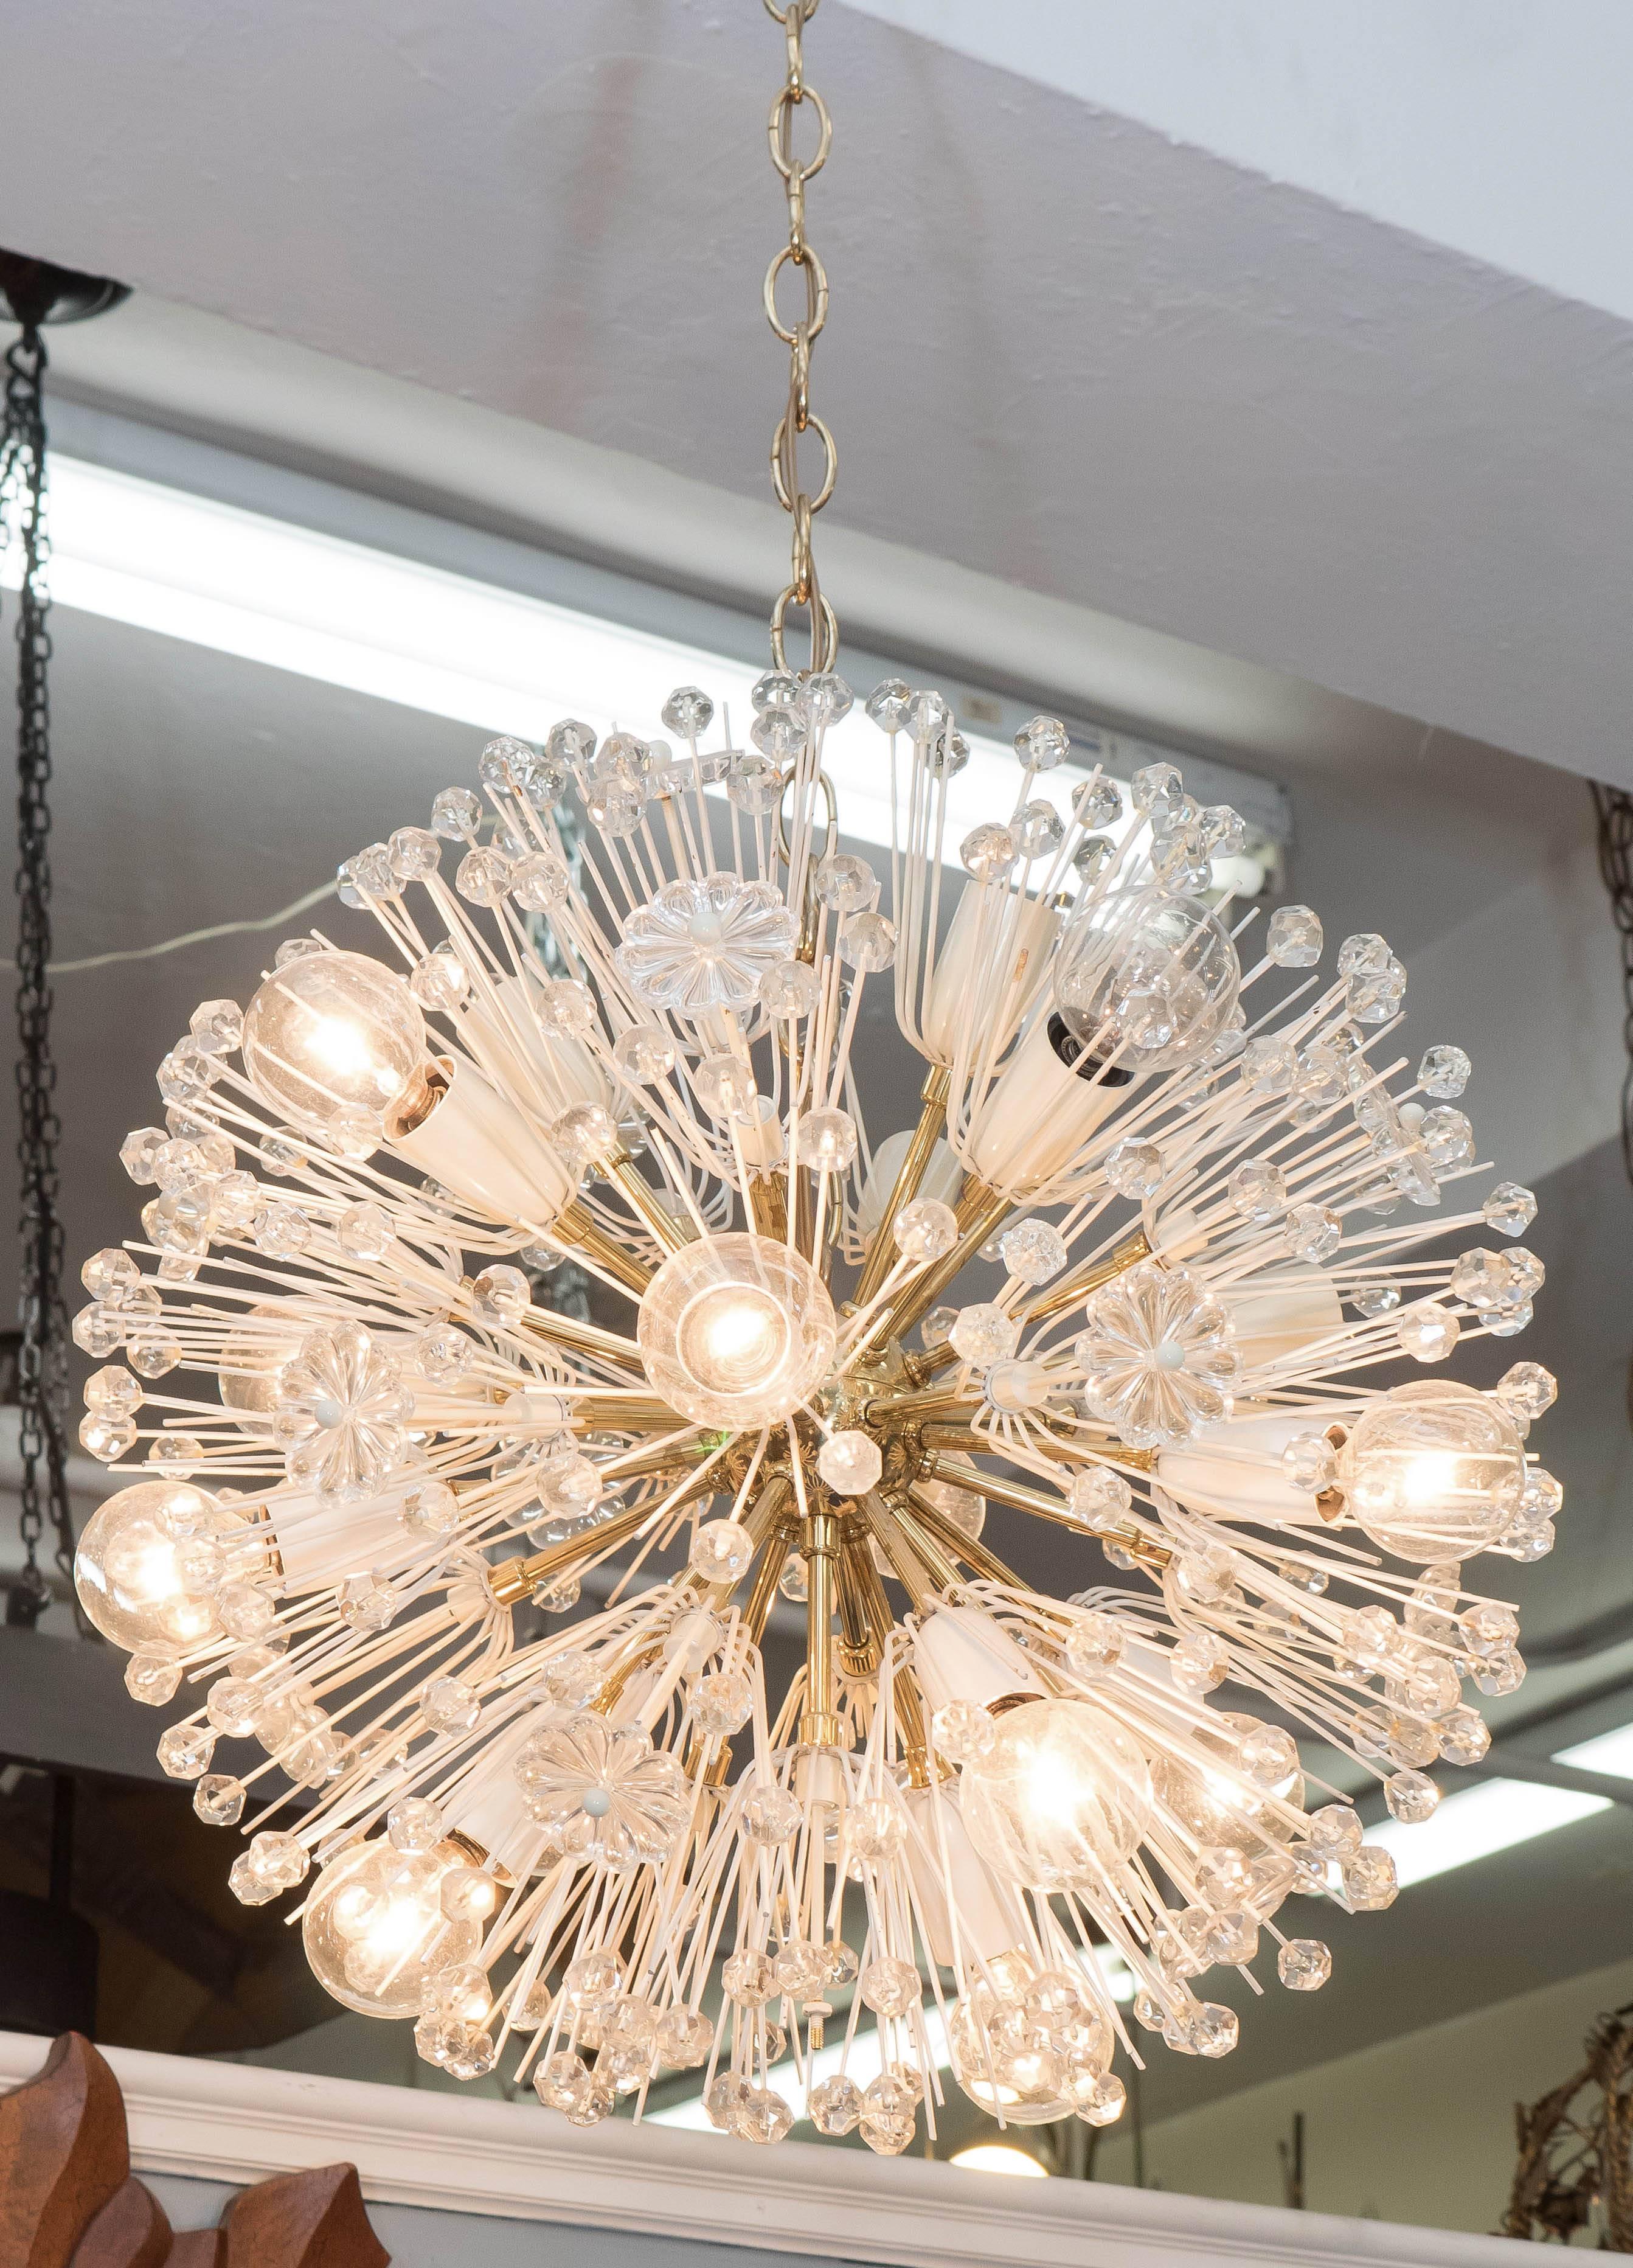 This 'dandelion' Sputnik chandelier by Austrian designer Emil Stejnar and produced by Rupert Nikoll circa 1960s, includes bright brass nucleus and arms, with white enameled socket covers, and surrounding faceted glass beads and rosettes. Very good